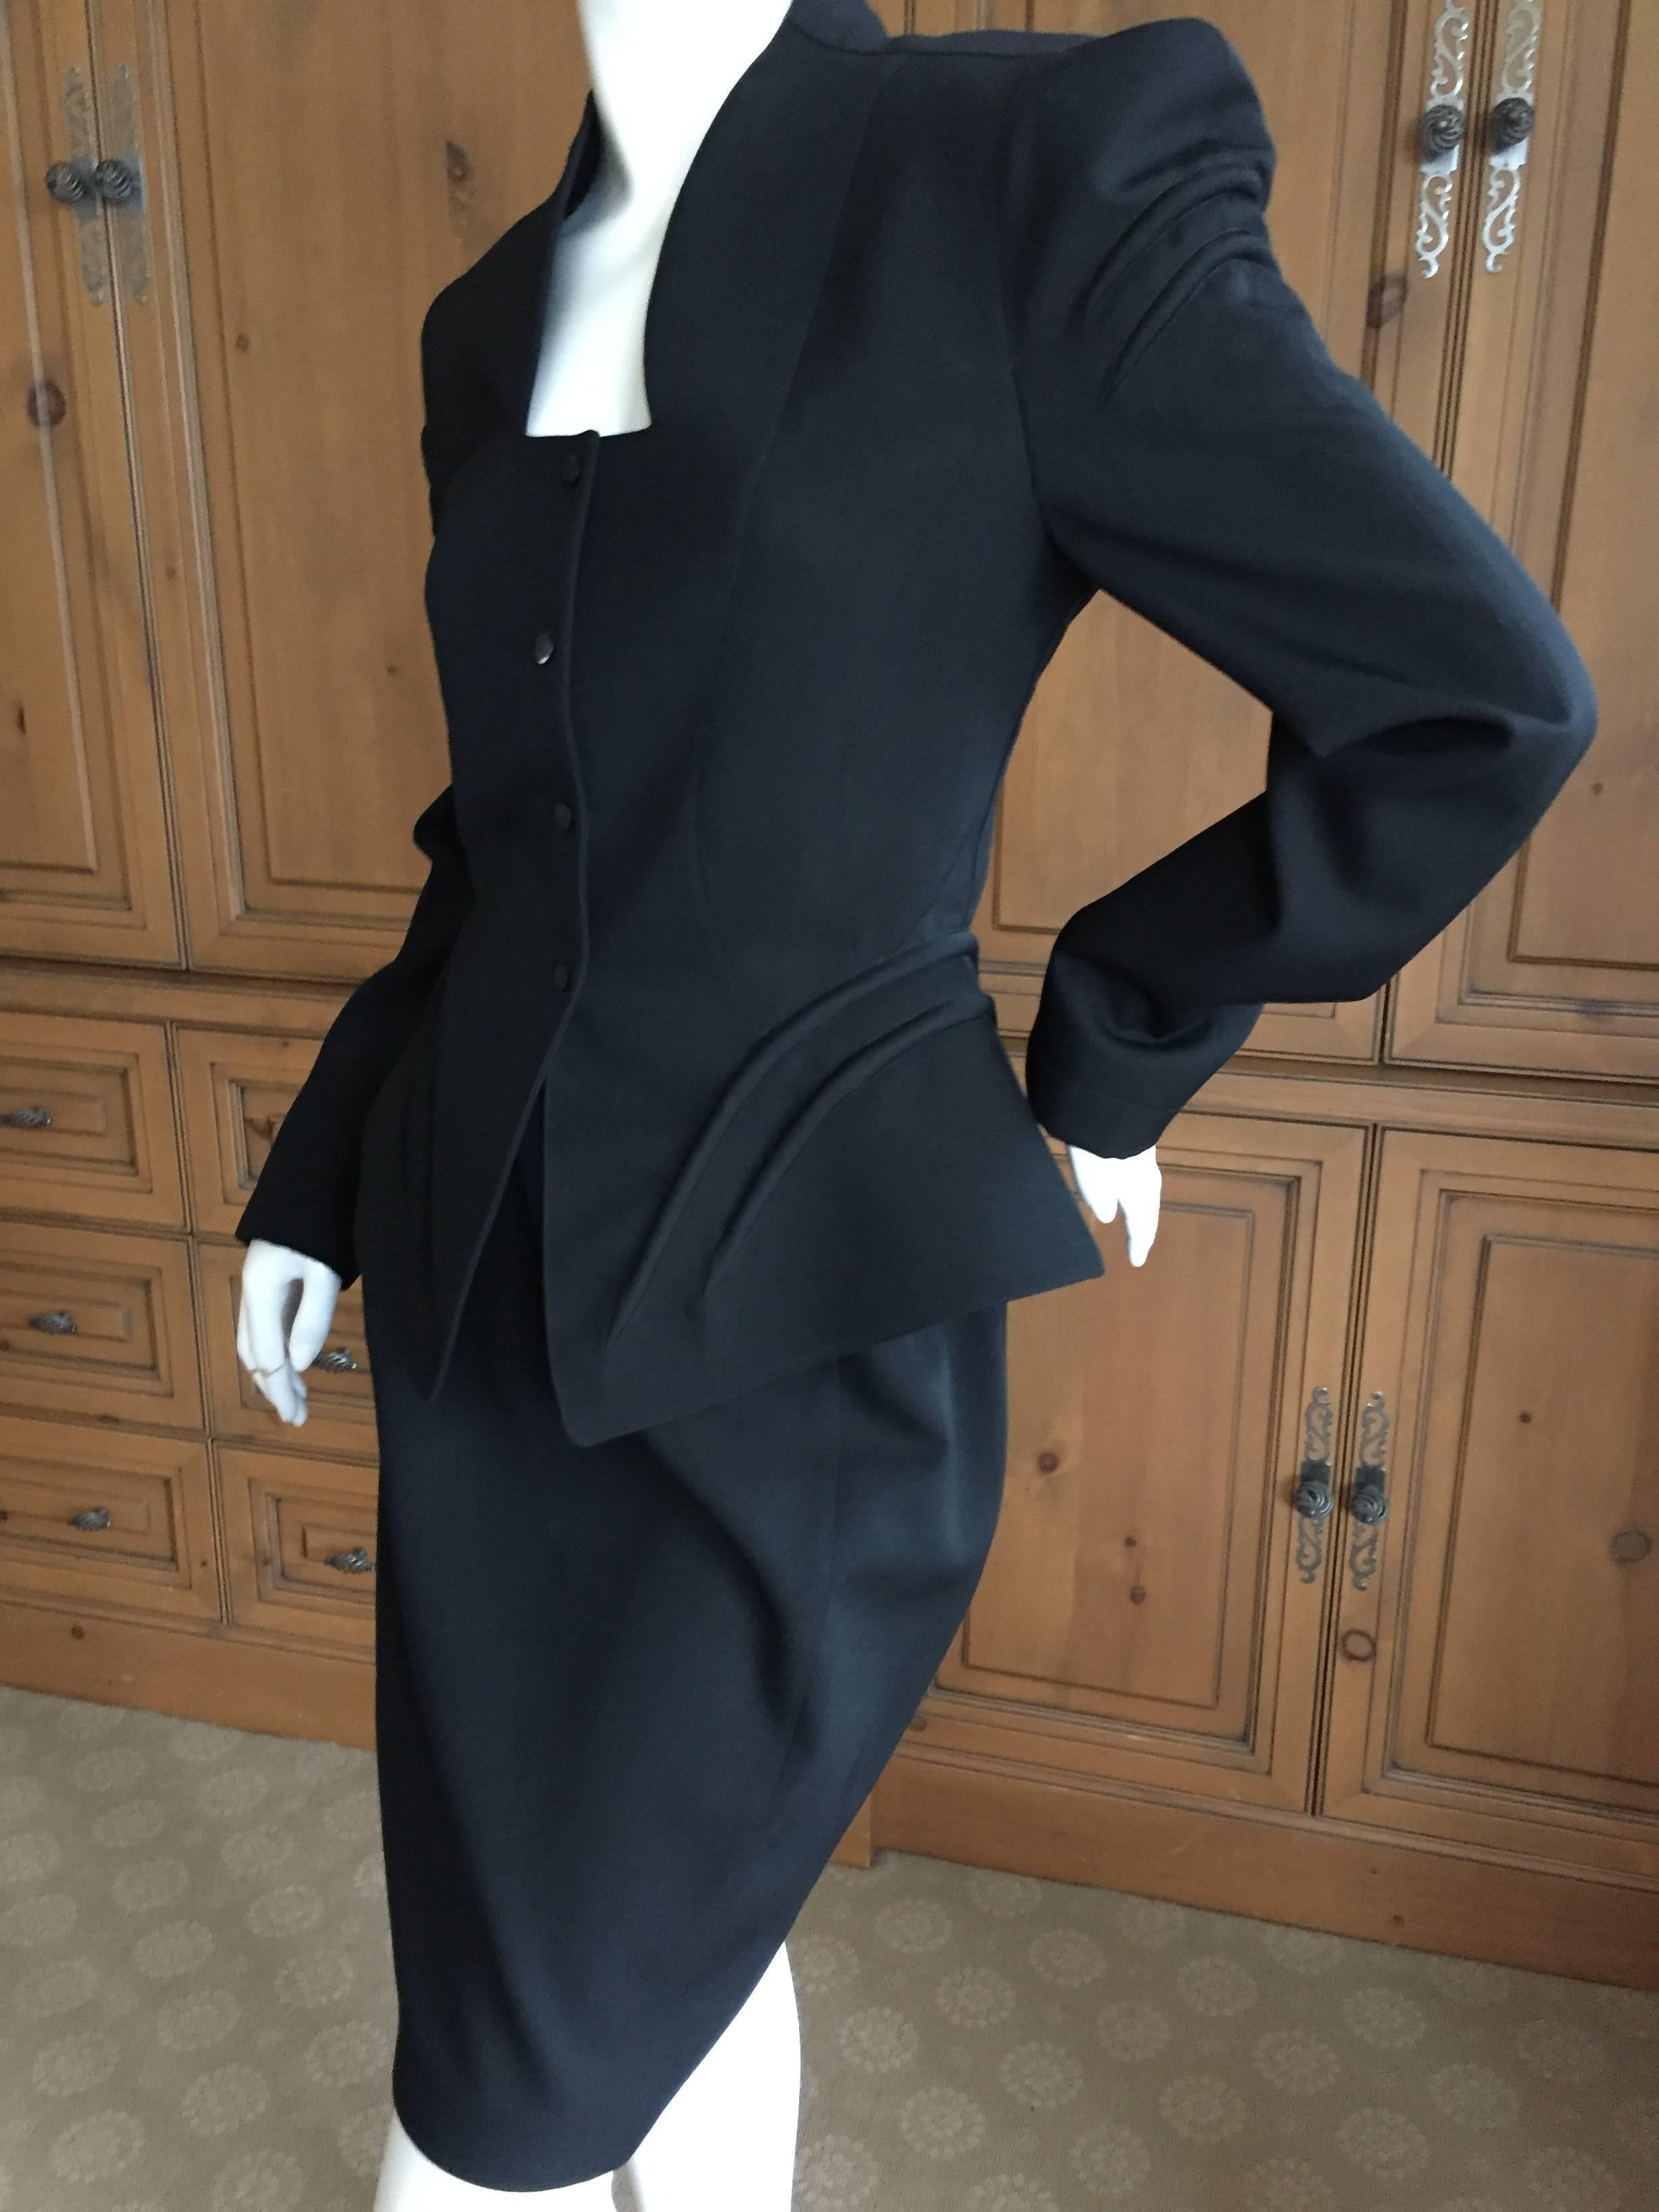 Thierry Mugler Vintage 80's Black Evening Suit Size 40 In Excellent Condition For Sale In Cloverdale, CA